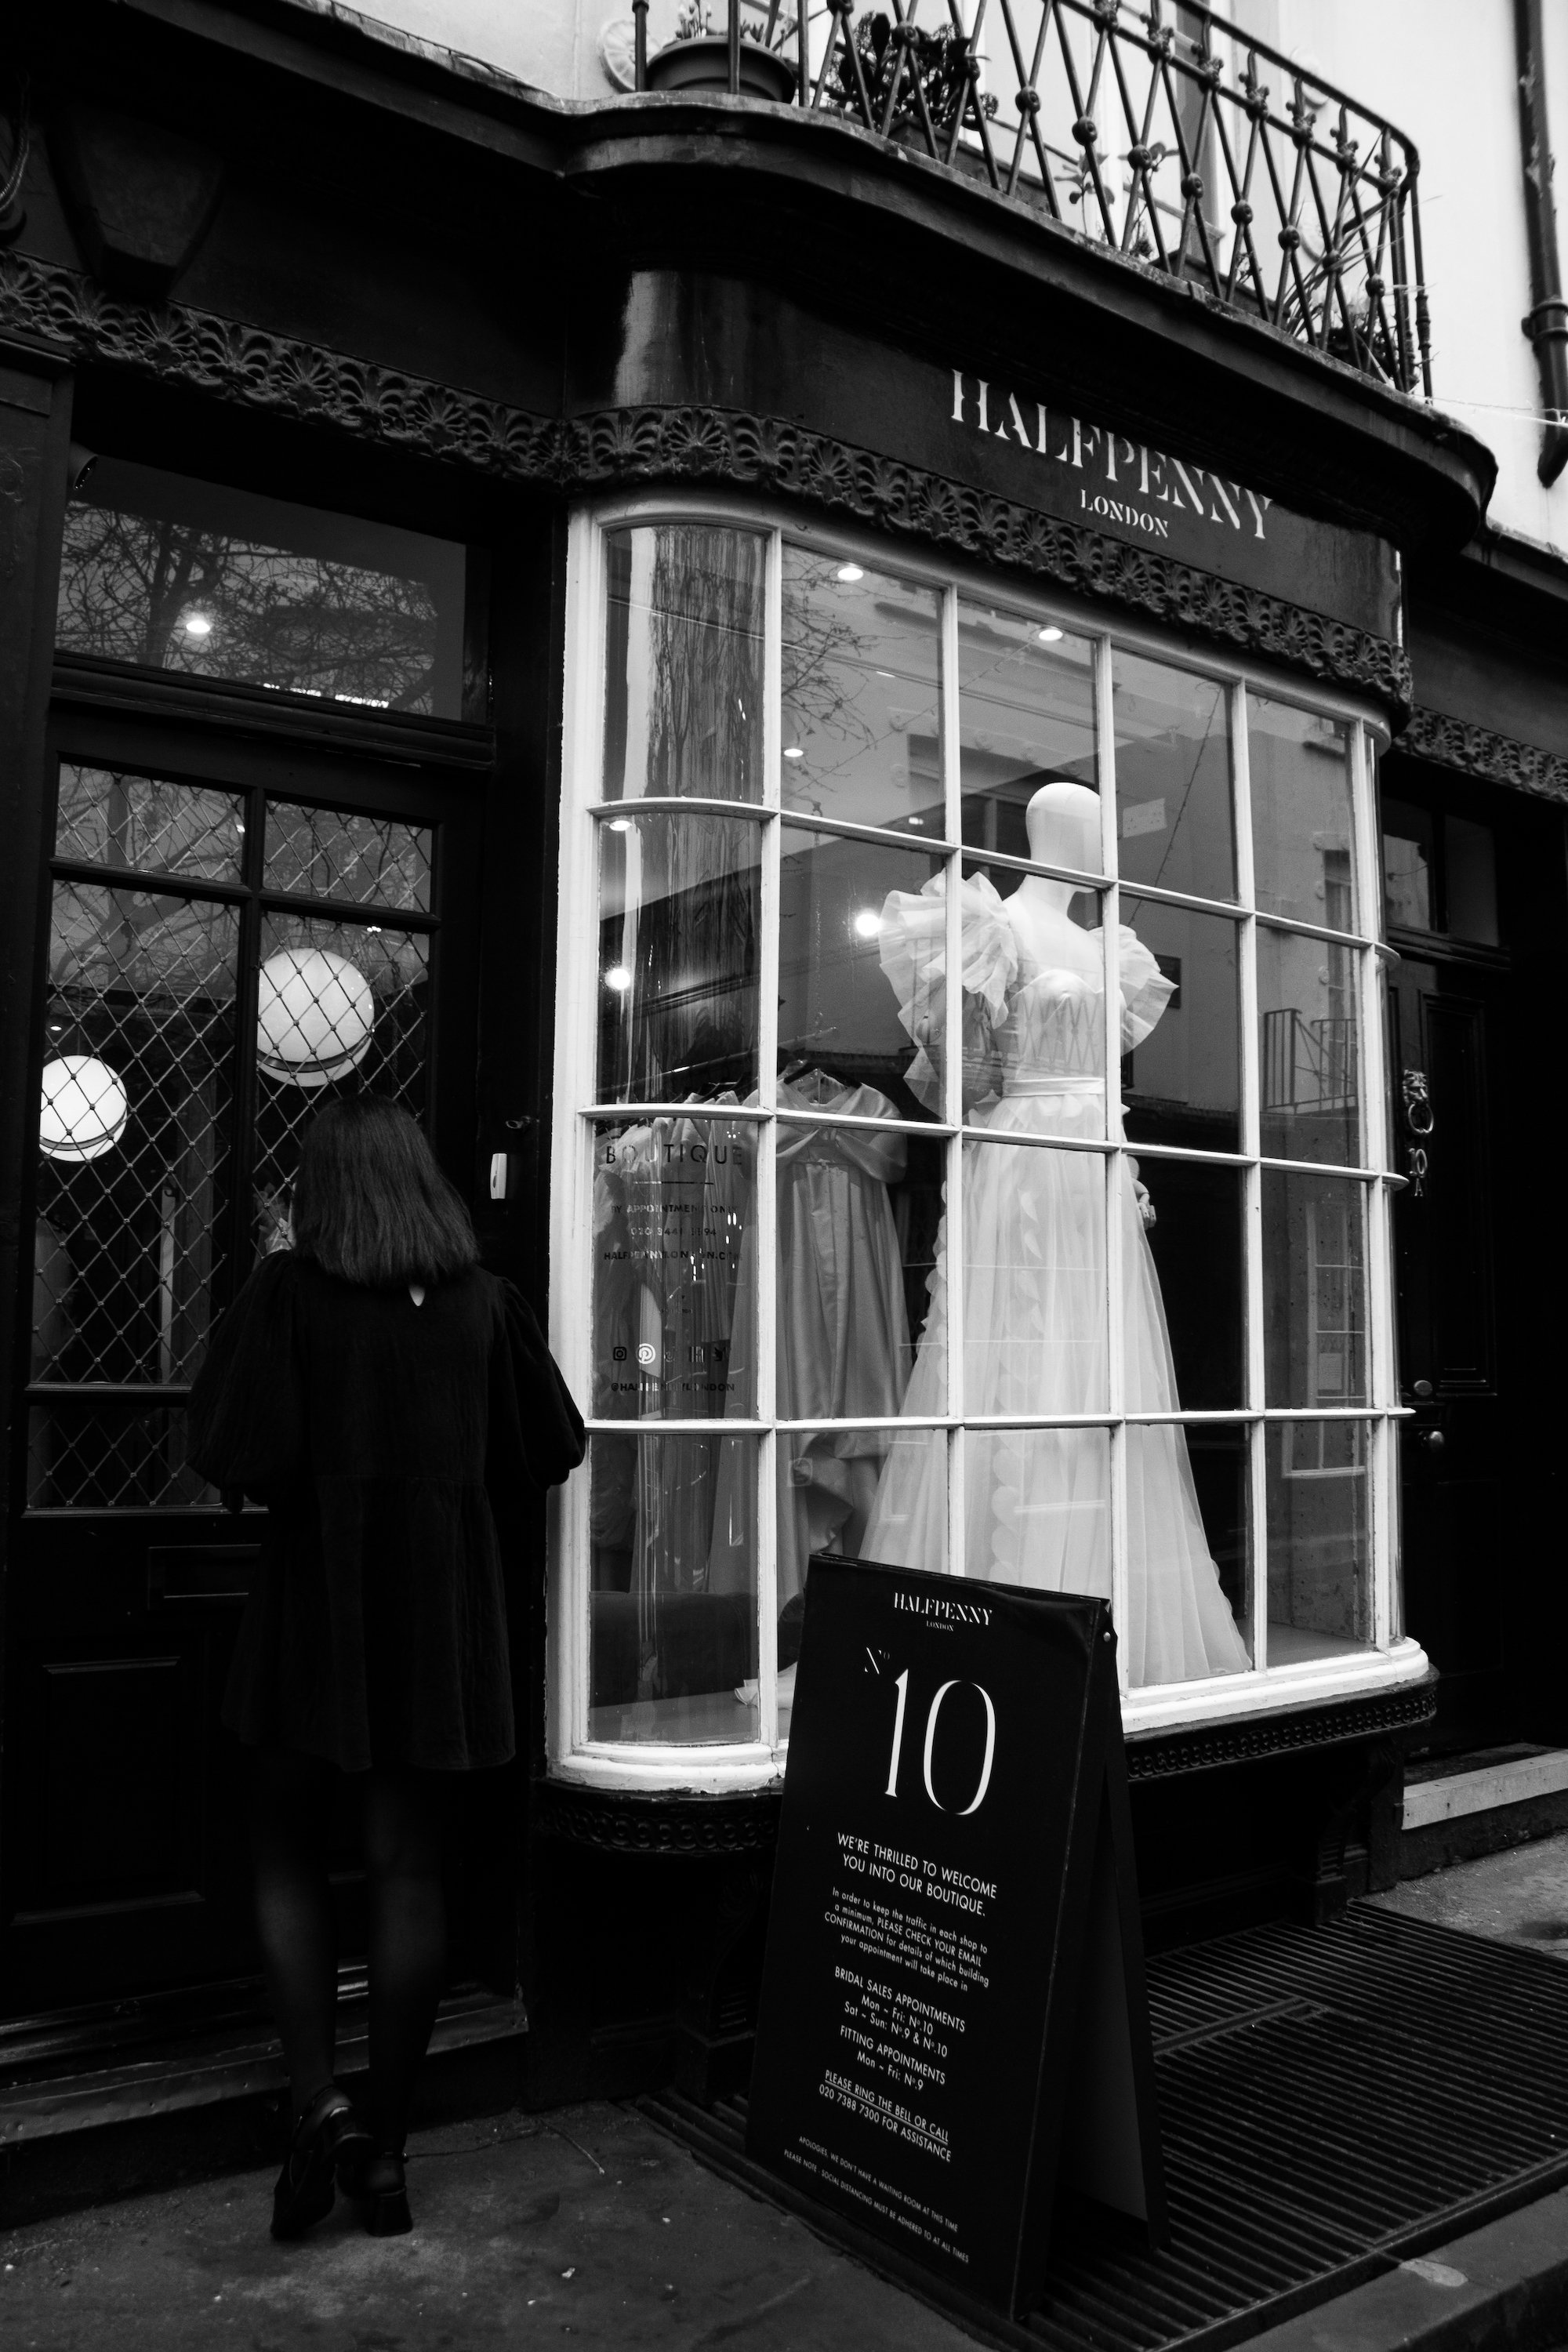 The Halfpenny London boutique in Woburn Walk